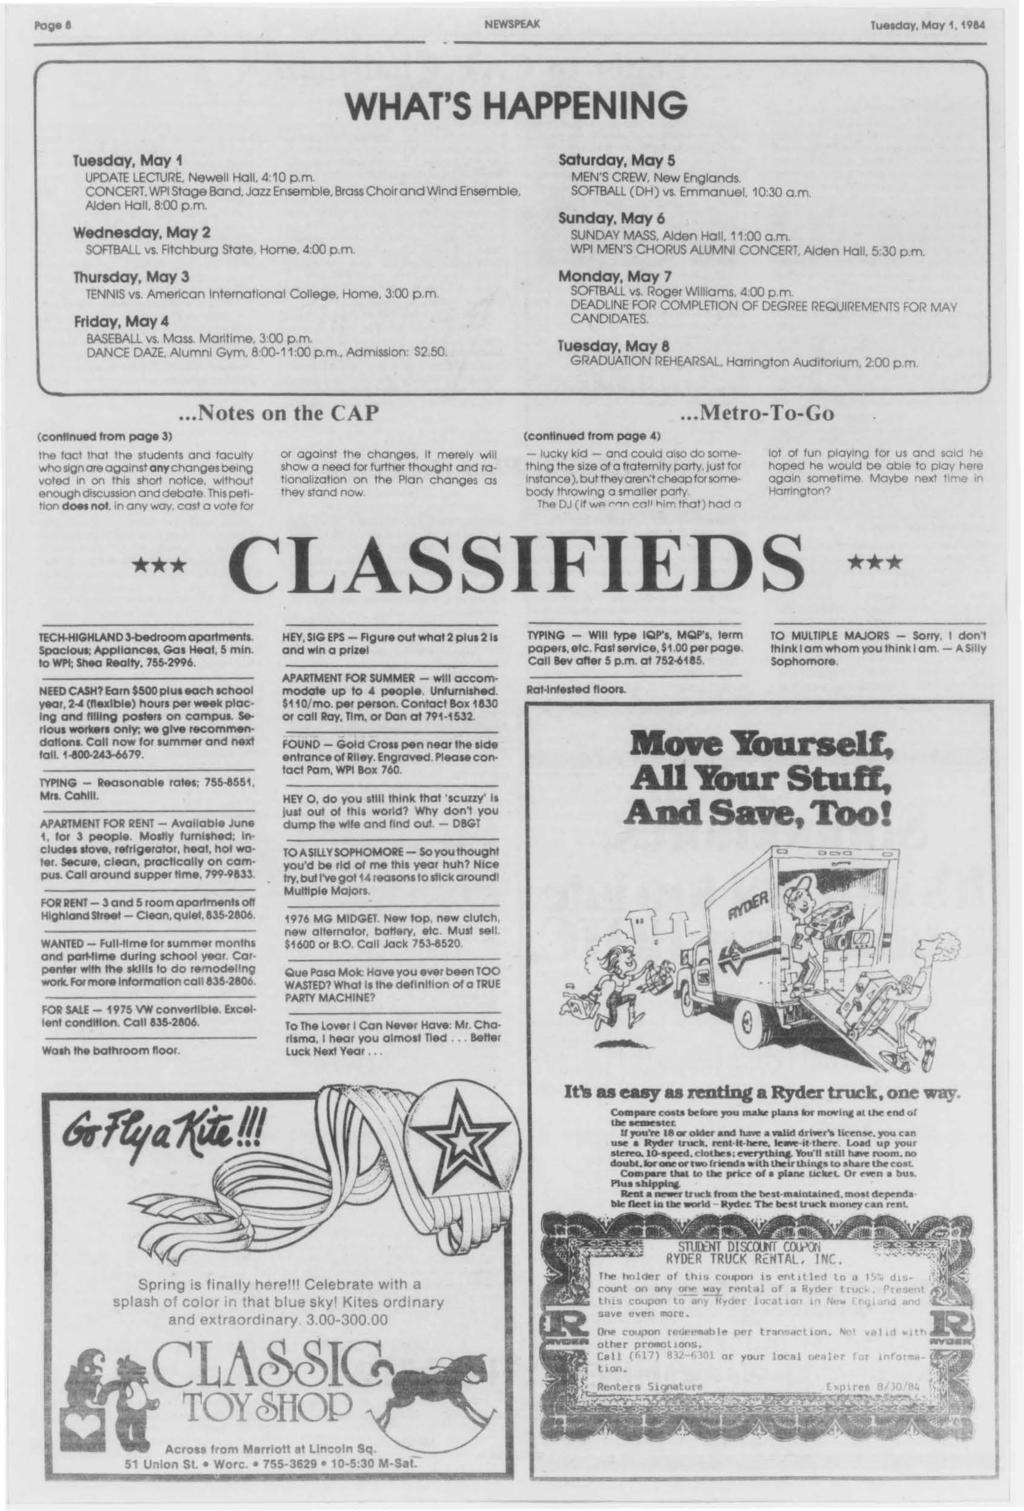 Page& NEWSPEAK Tuesday, May 1, 1984 WHAT'S HAPPENNG Tuesday, May 1 UPDATE LECTURE. Newell Hall. 4:10 p.m. CONCERT WP Sage Band. Jazz Ensemble. Brass Choir and Wind Ensemble, Alden Hall. 8:00 p.m. Wednesday, May 2 SOFTBALL vs.